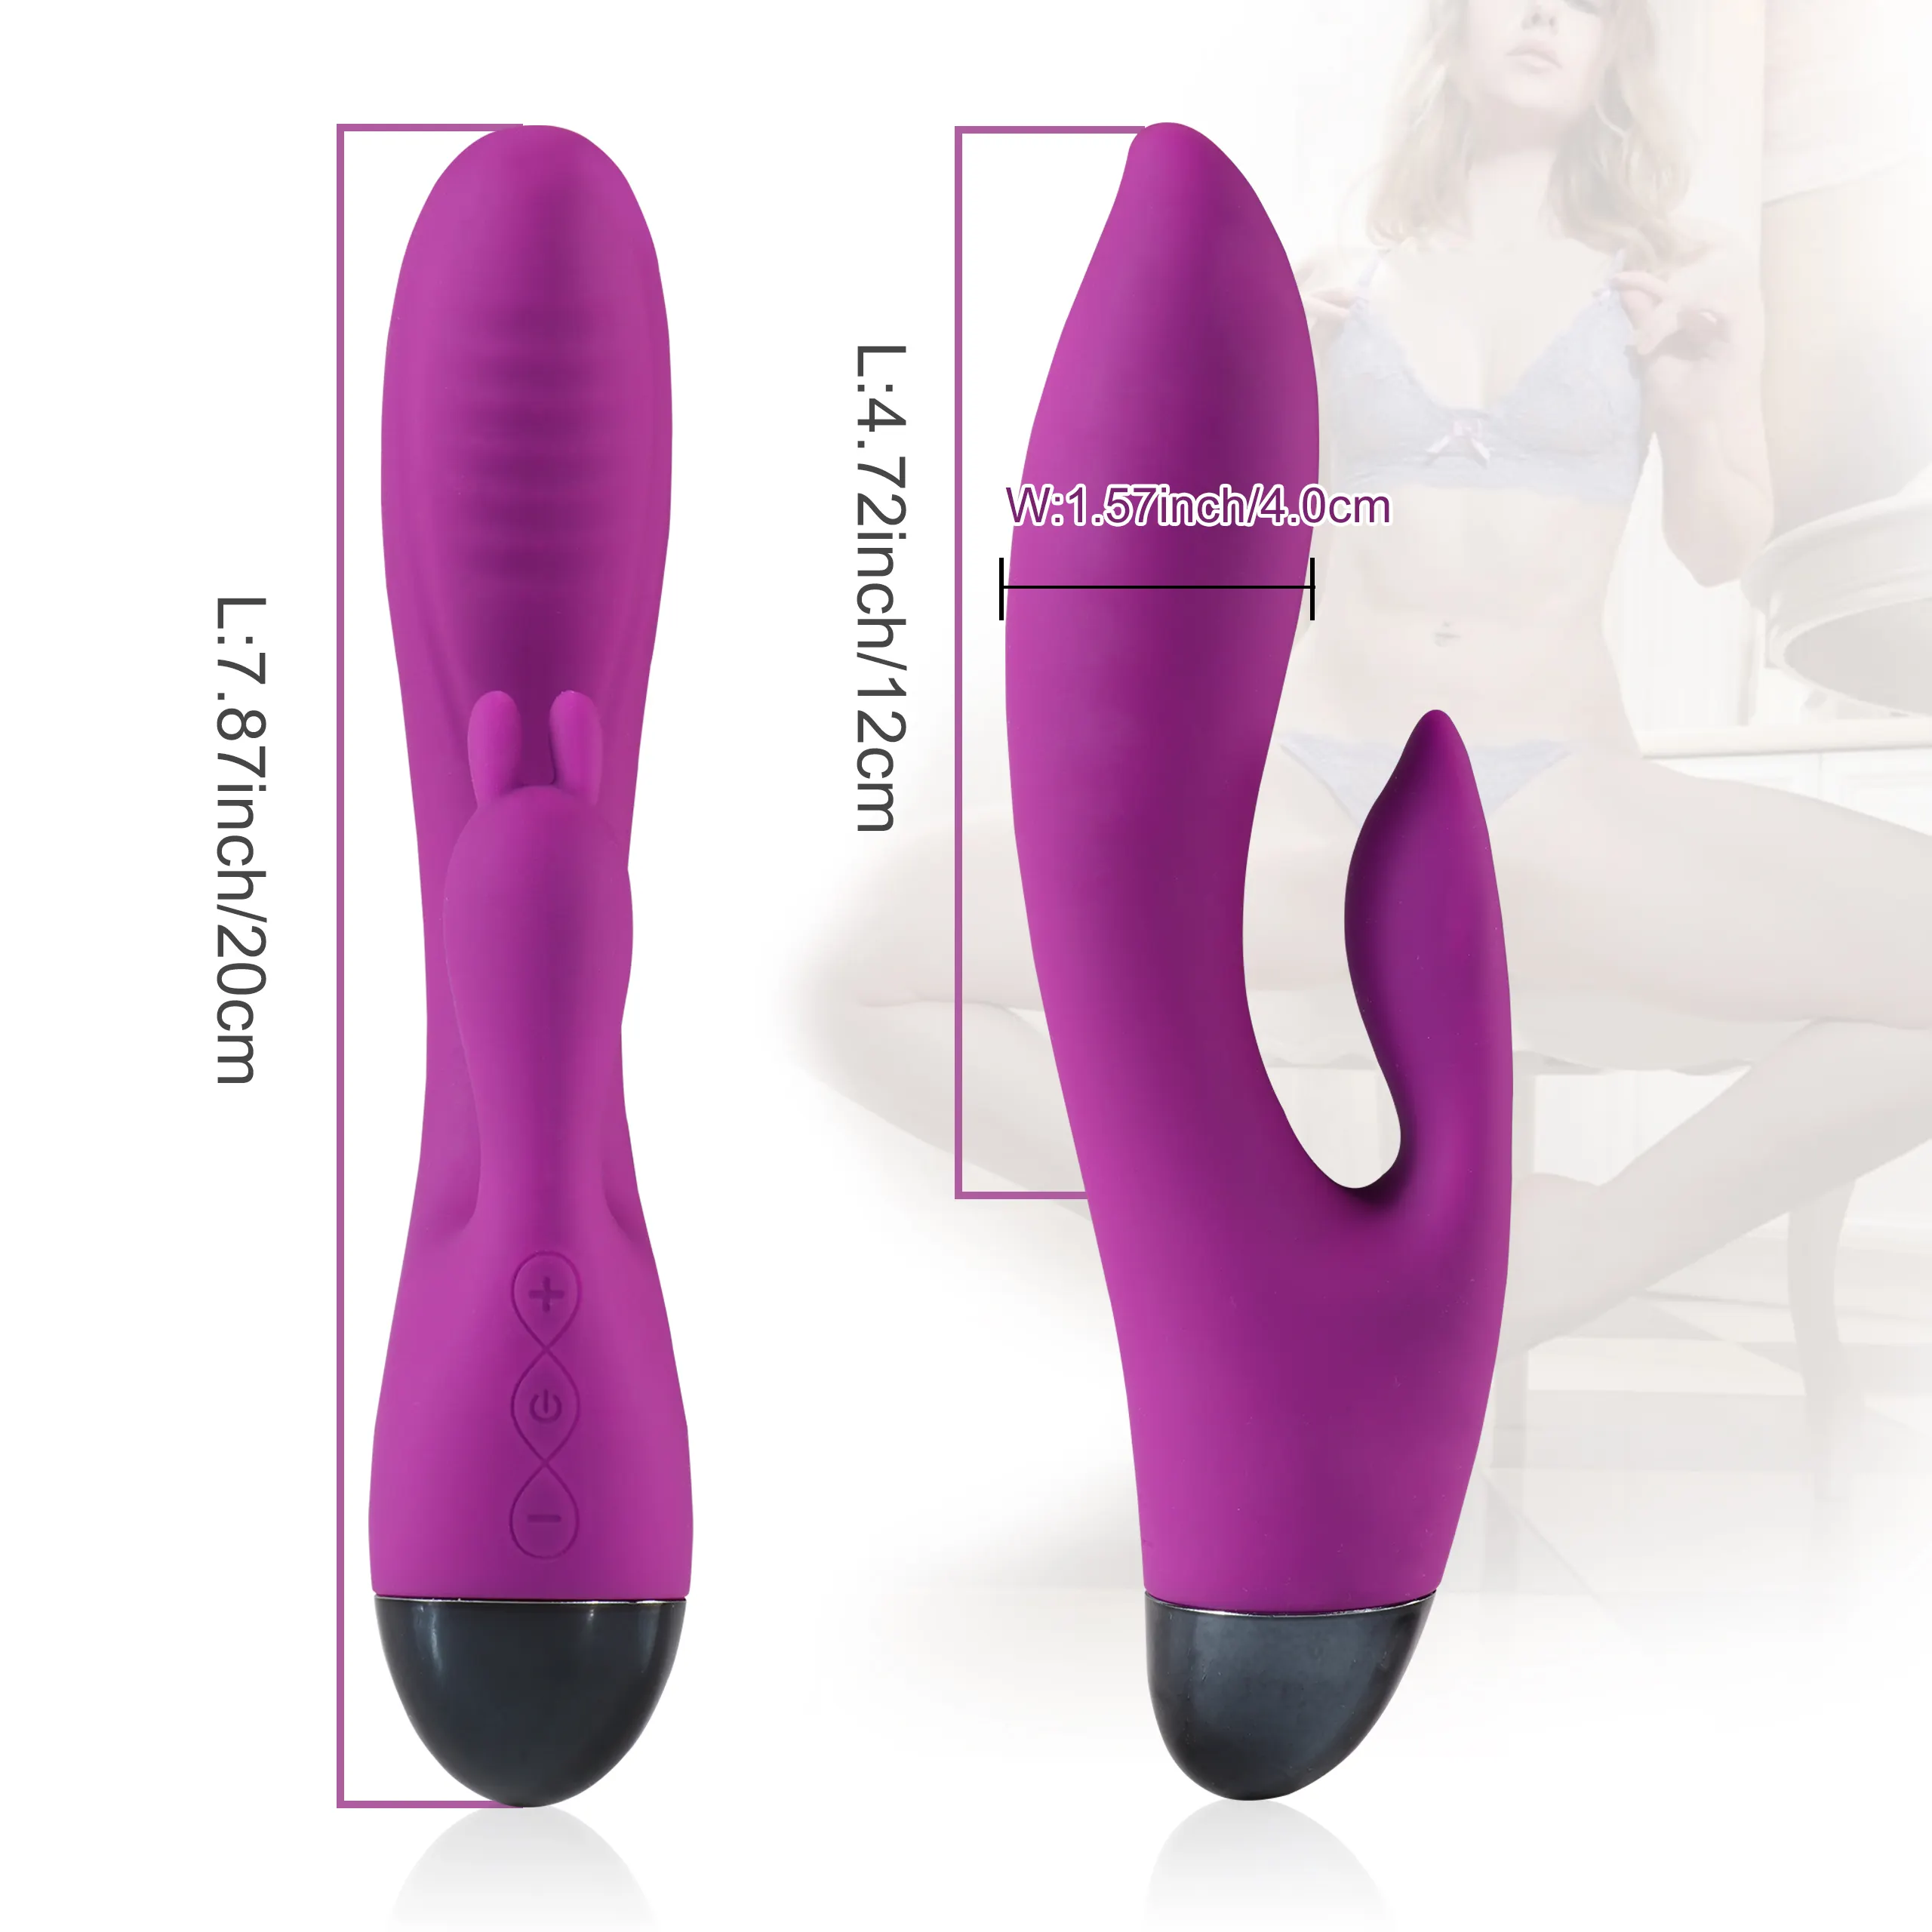 YouQDOLL US Warehouse High Quality Waterproof Rechargeable G Spot Rabbit Vibrator Sex Toys Free Dildos And vibrators For Women